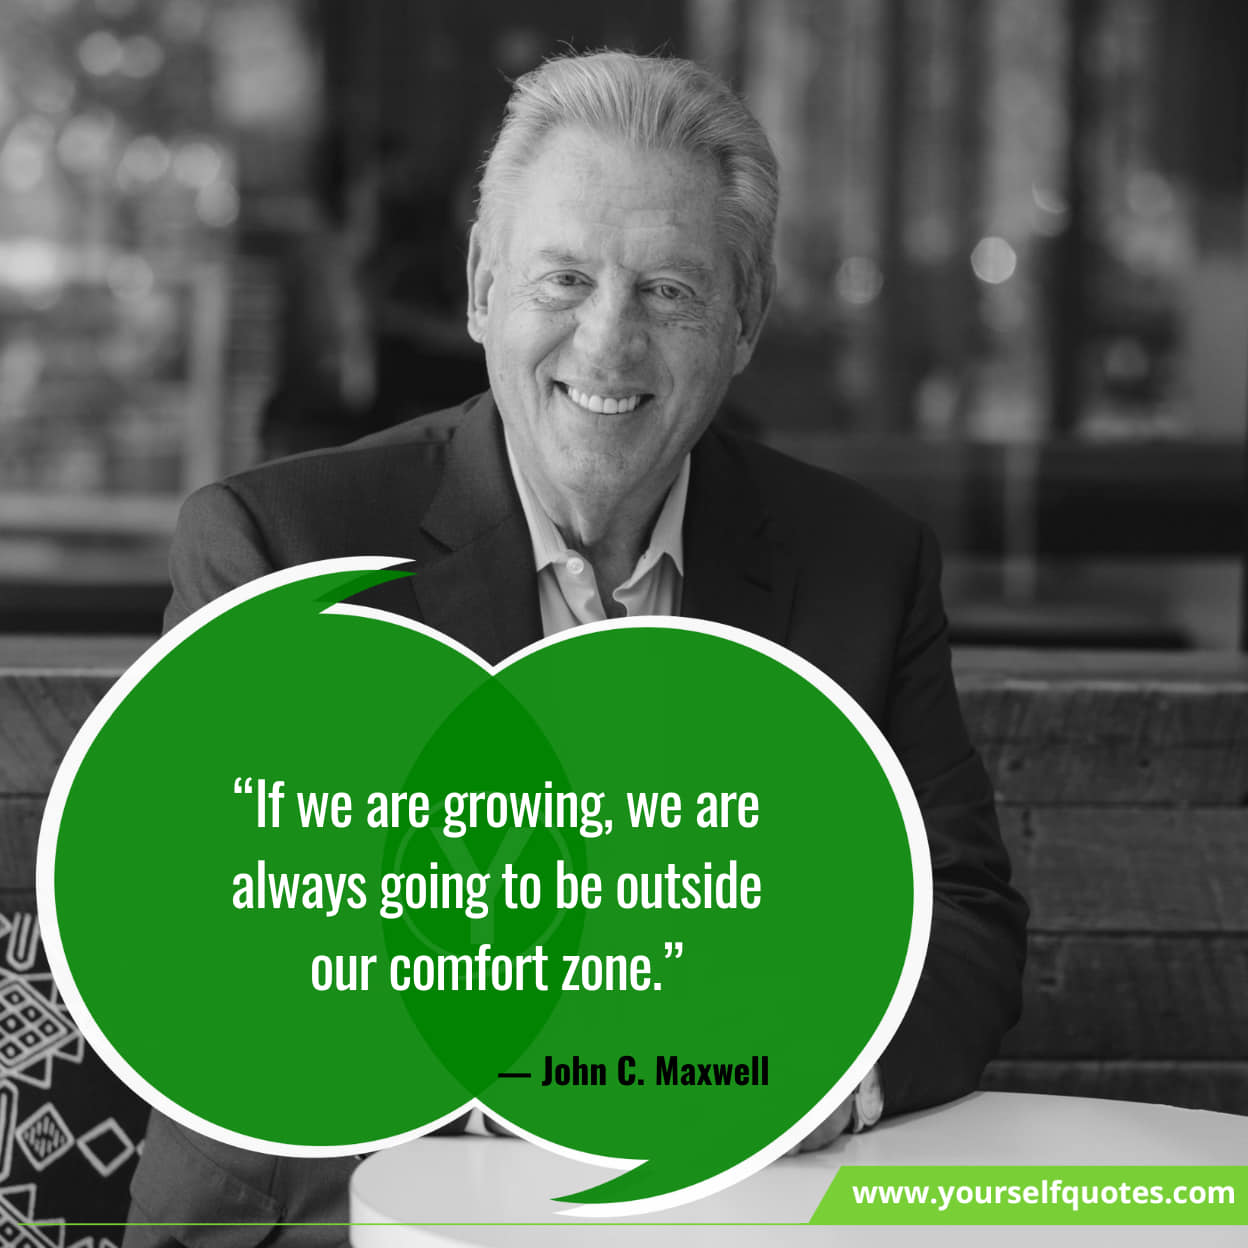 John C. Maxwell quotes on teamwork and collaboration